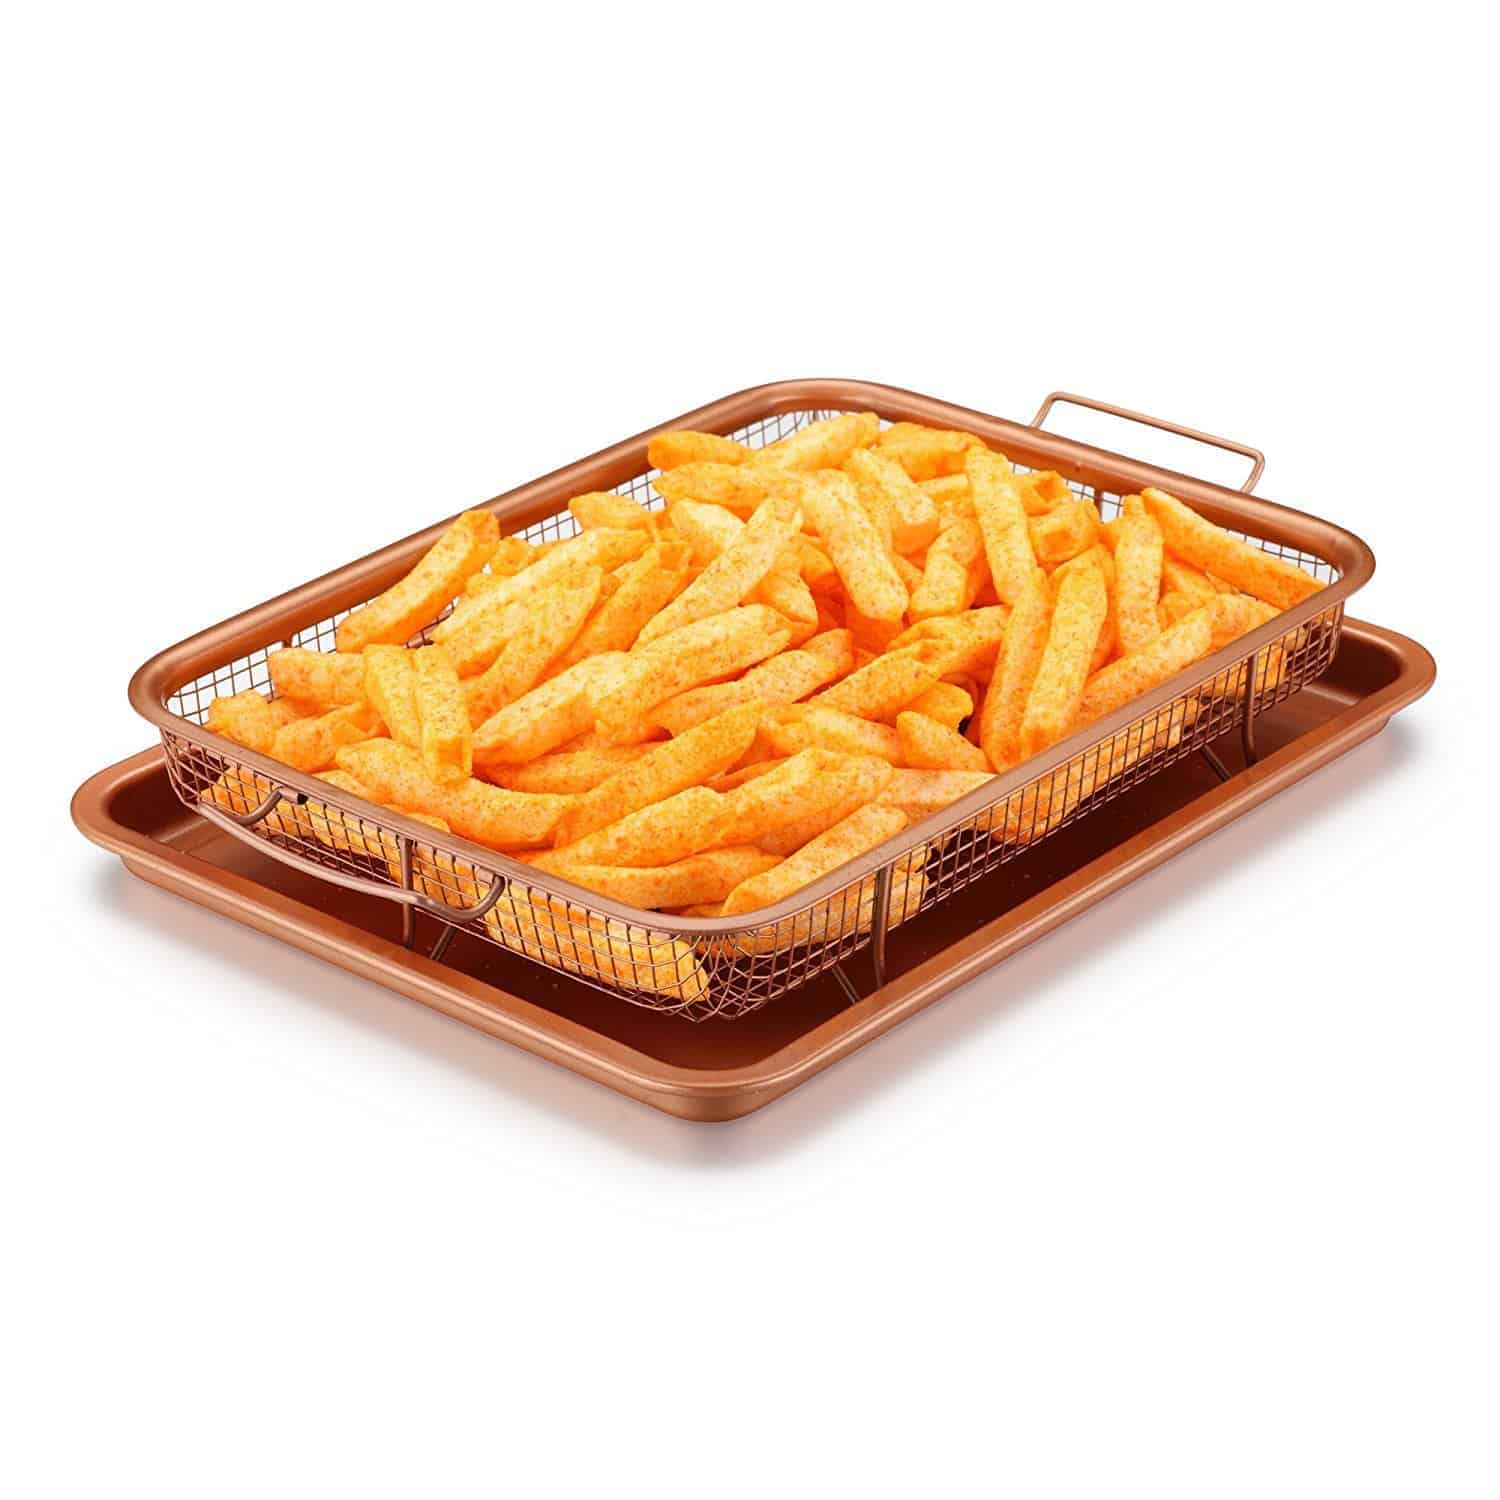 Copper Chef Crisper Tray-Non-Stick Cookie Sheet Tray and Air Fry Mesh Basket Set